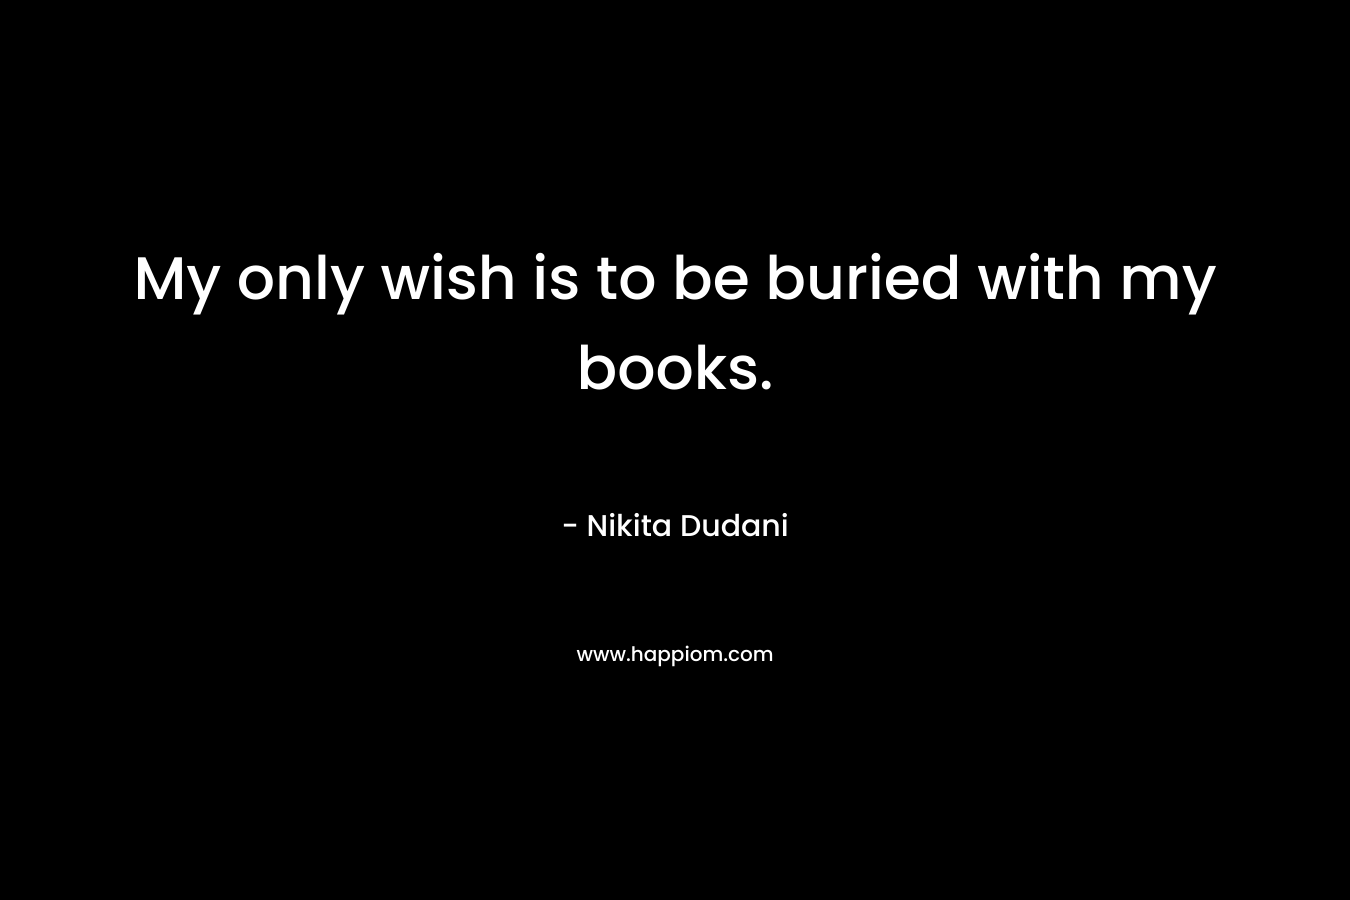 My only wish is to be buried with my books. – Nikita Dudani